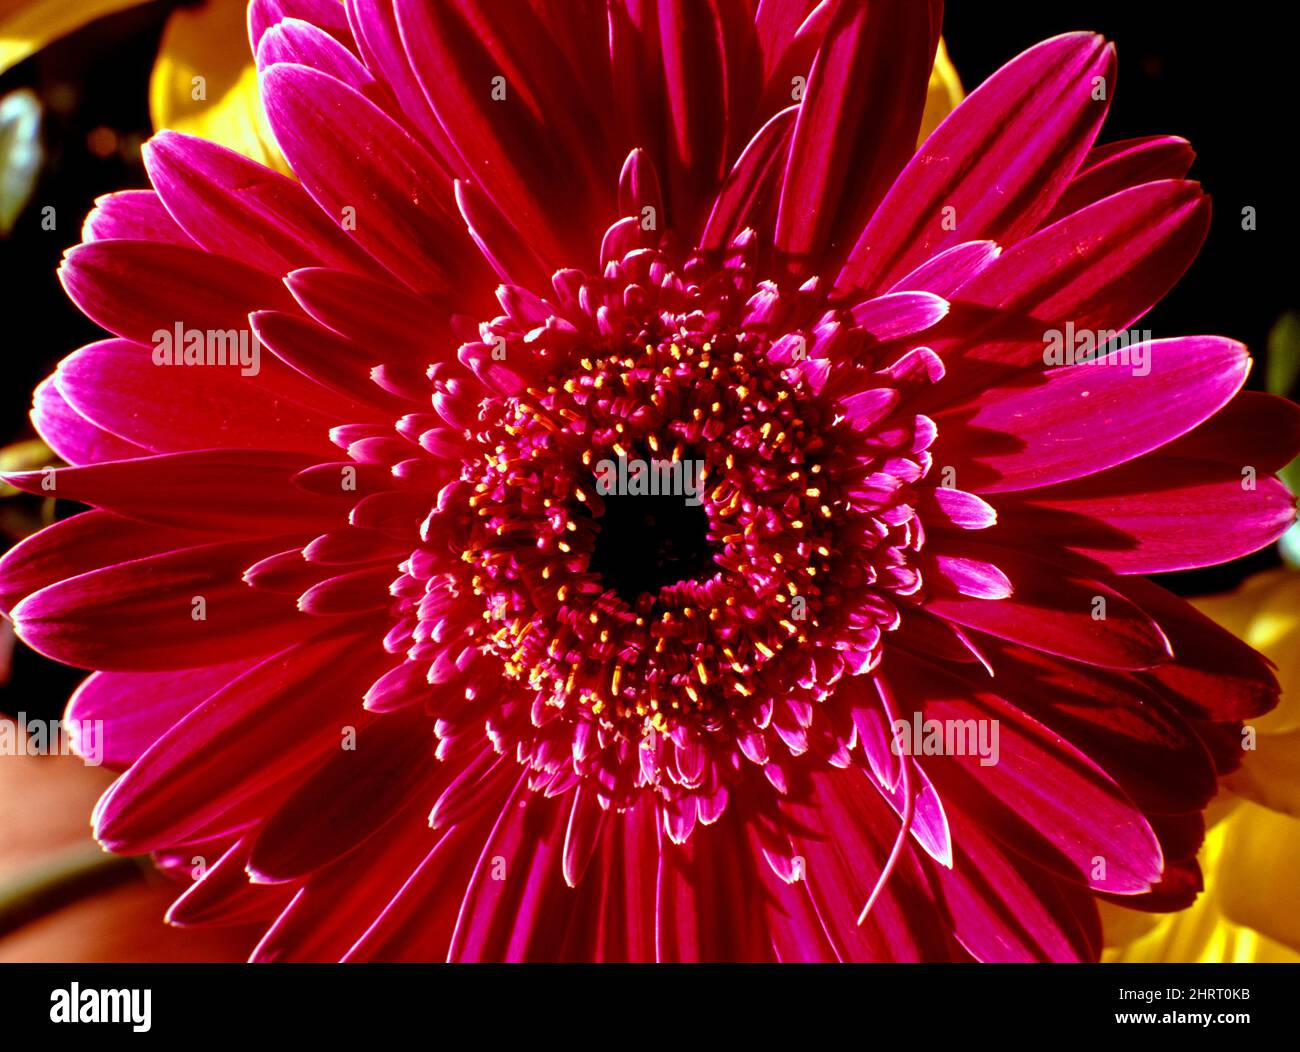 Chrysanthemum, Cultivated Flower, Asteraceae. Stock Photo